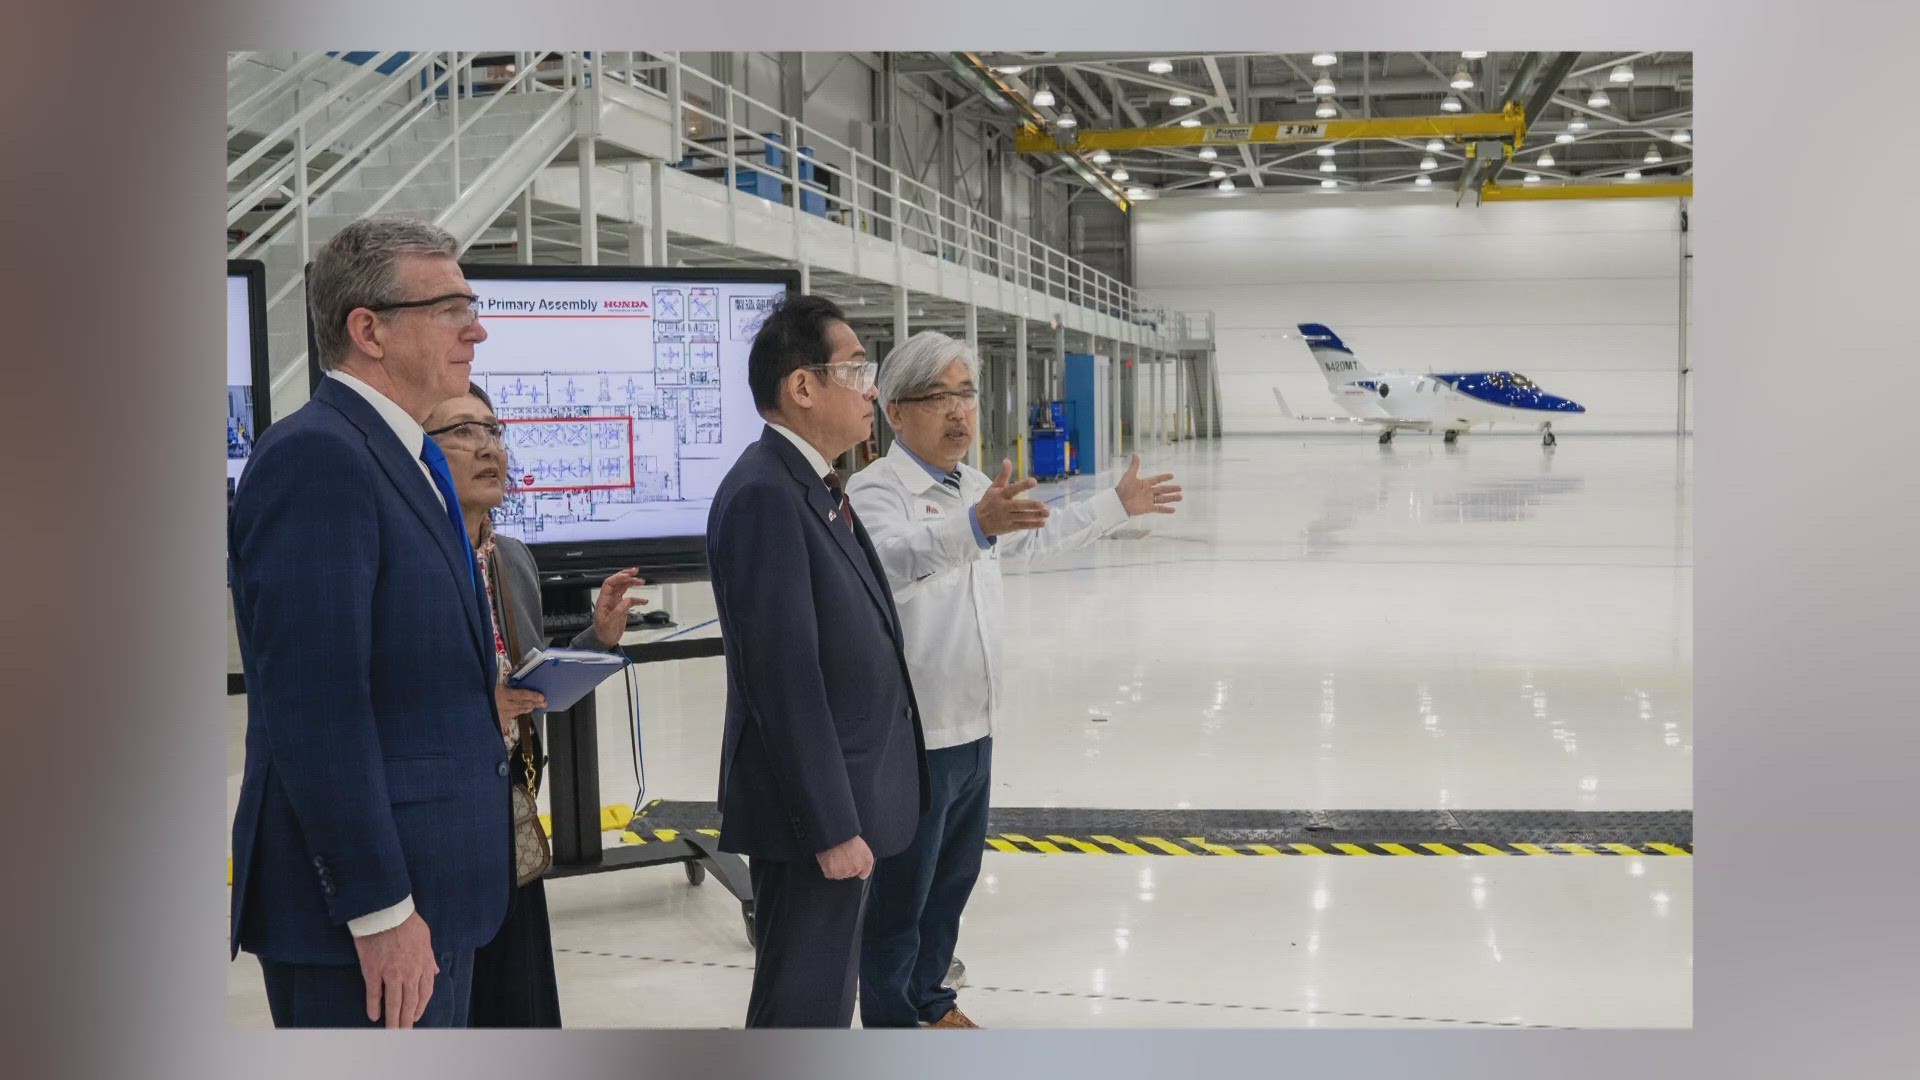 He spoke with leaders at the Toyota and HondaJet facilities.